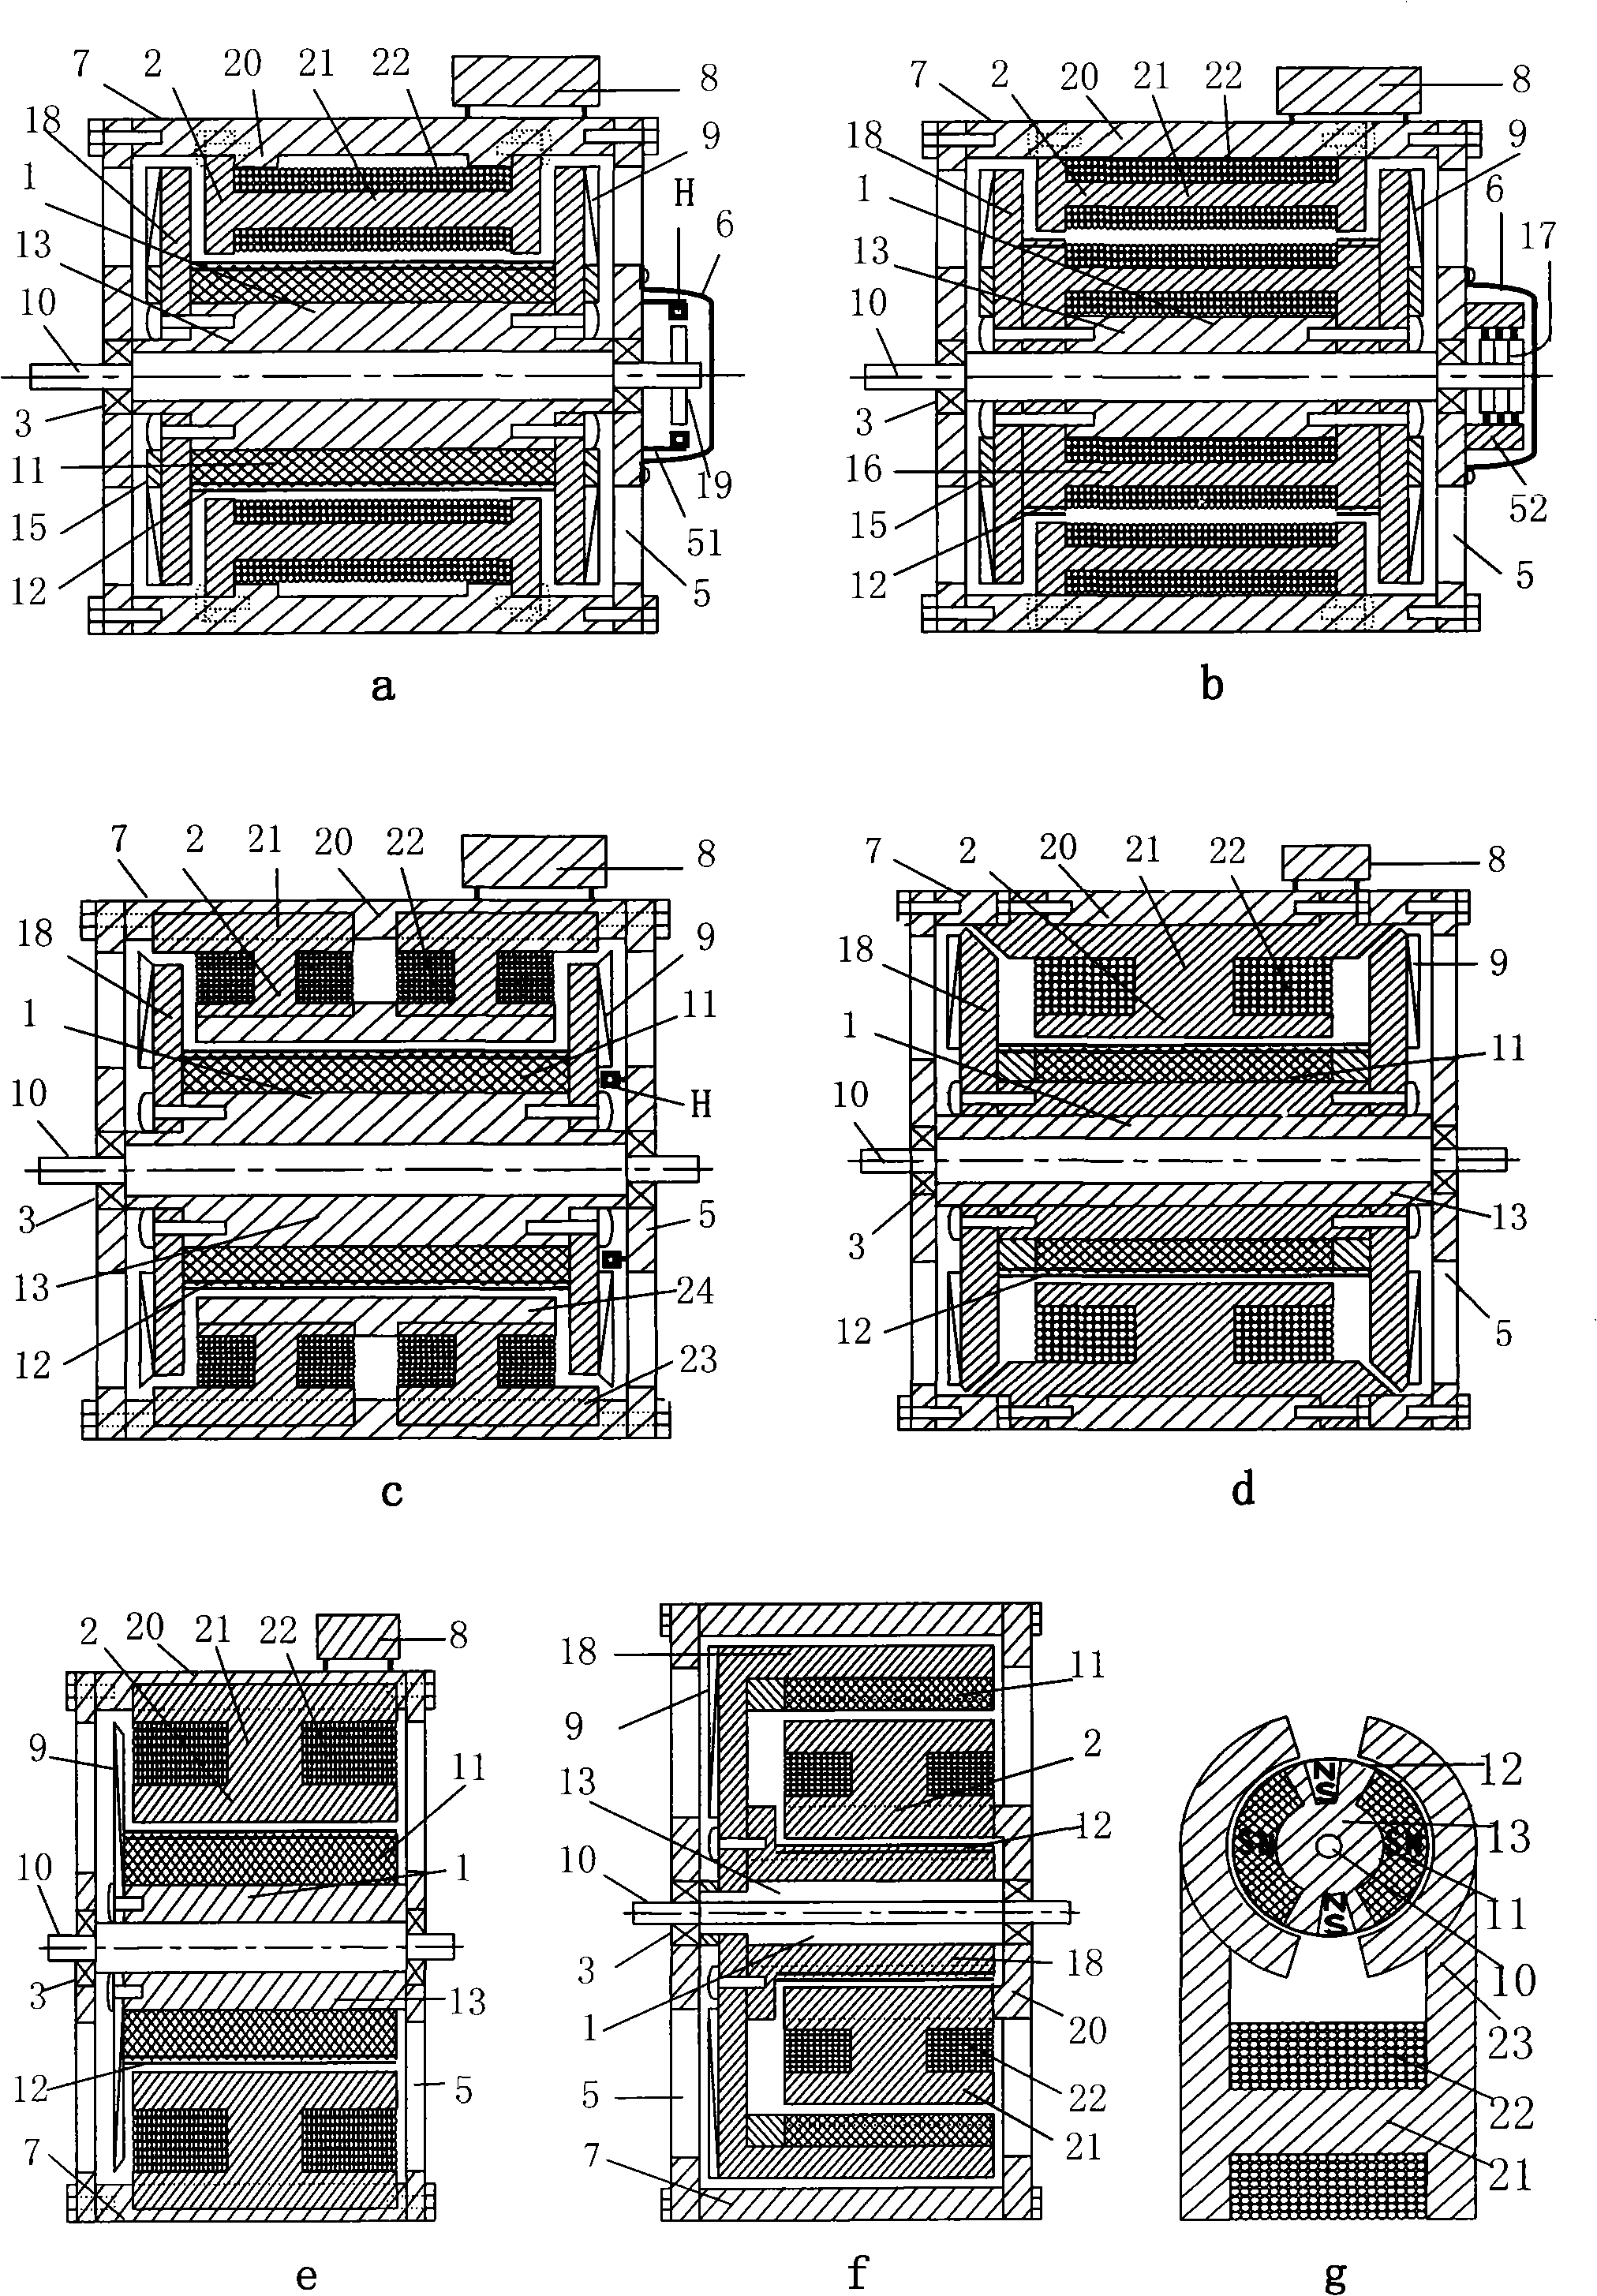 Motor with strong weak air-gap field in alternative distribution